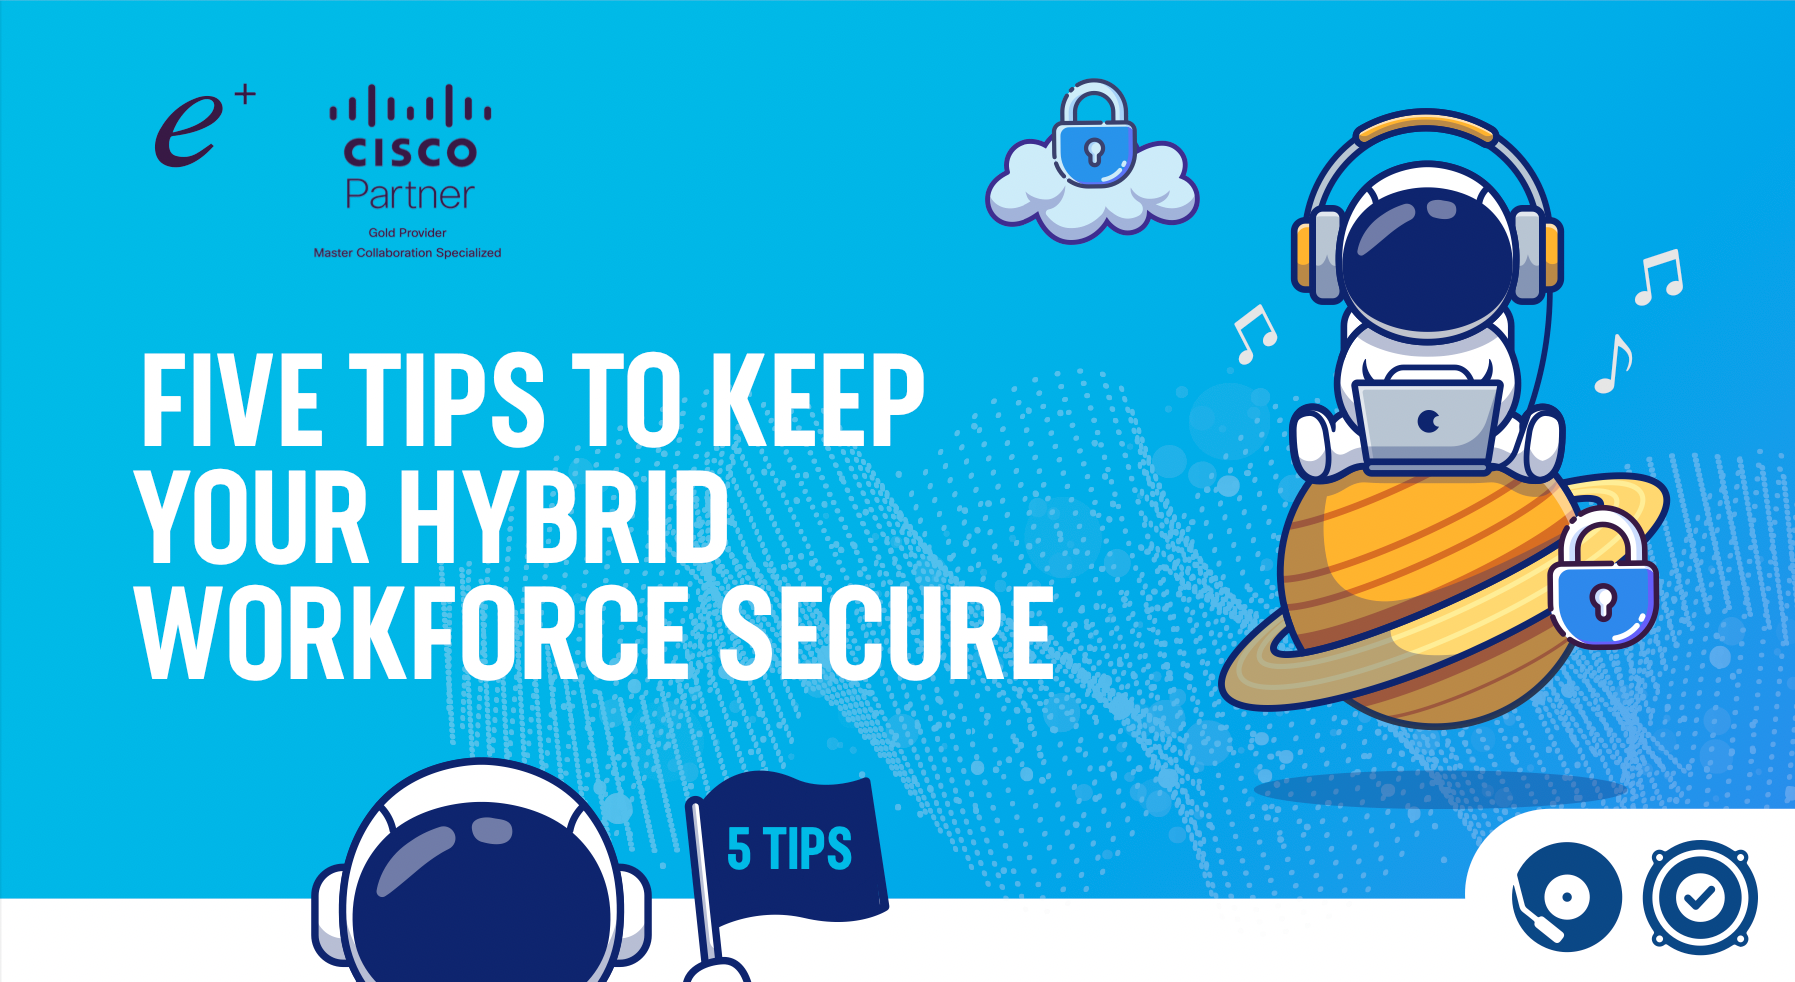 Five Tips to Keep Your Hybrid Workforce Secure thumbnail showing company logo, title and a spaceman sitting on a planet with a laptop